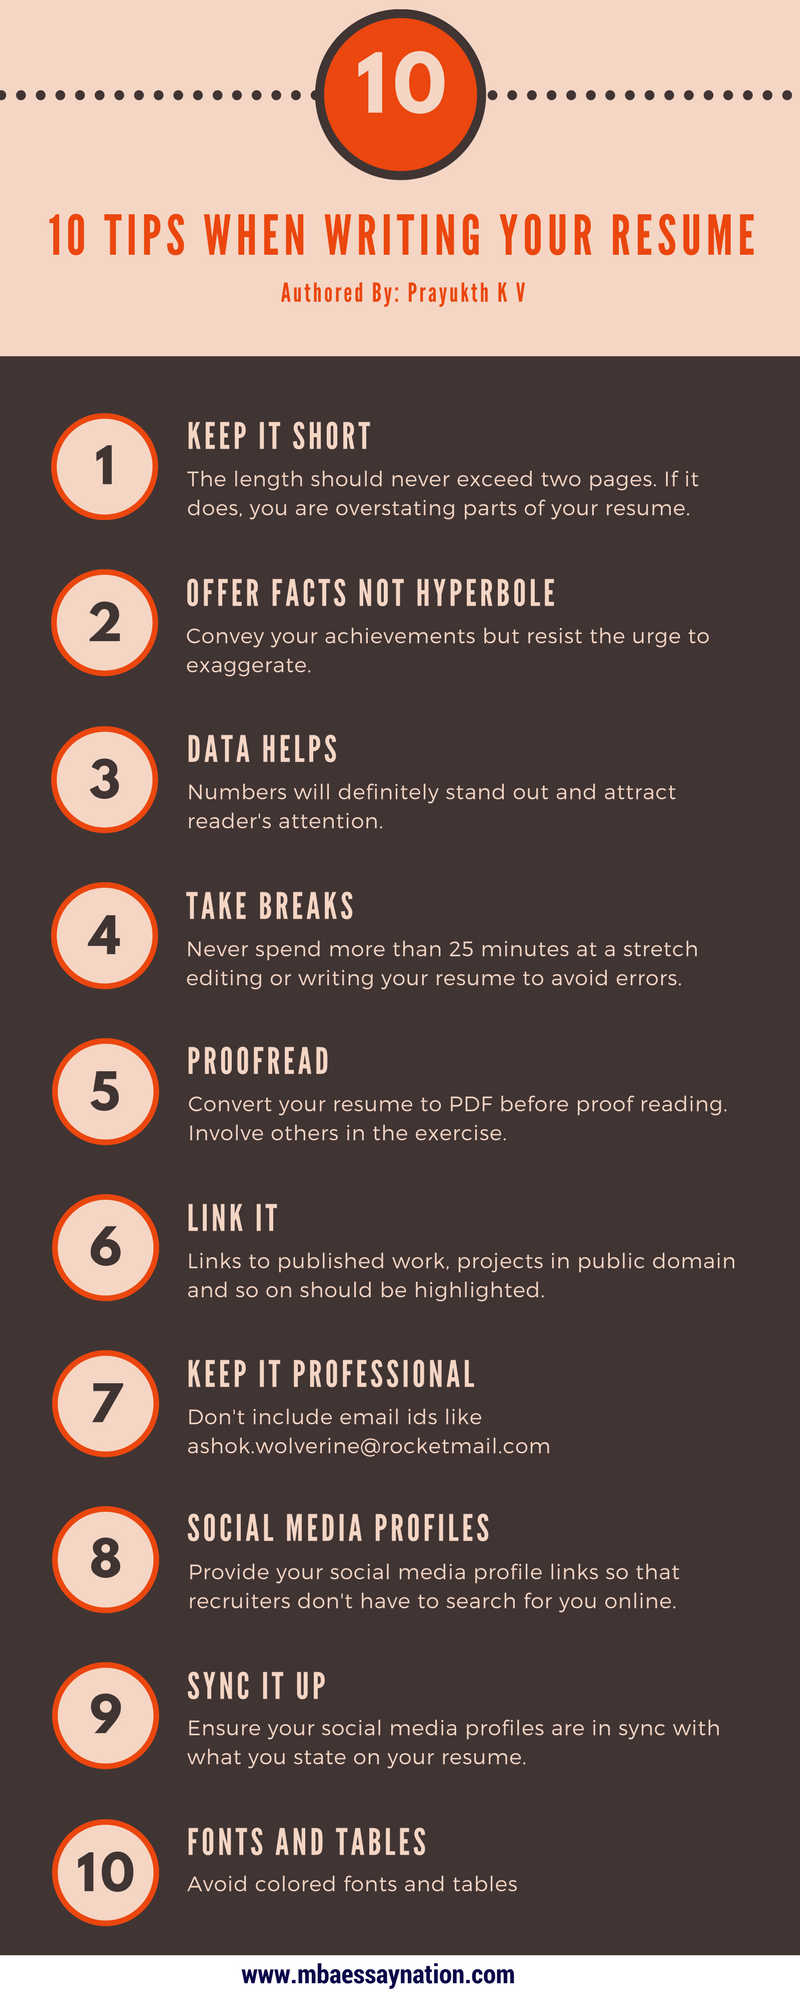 10 important tips for writing a resume